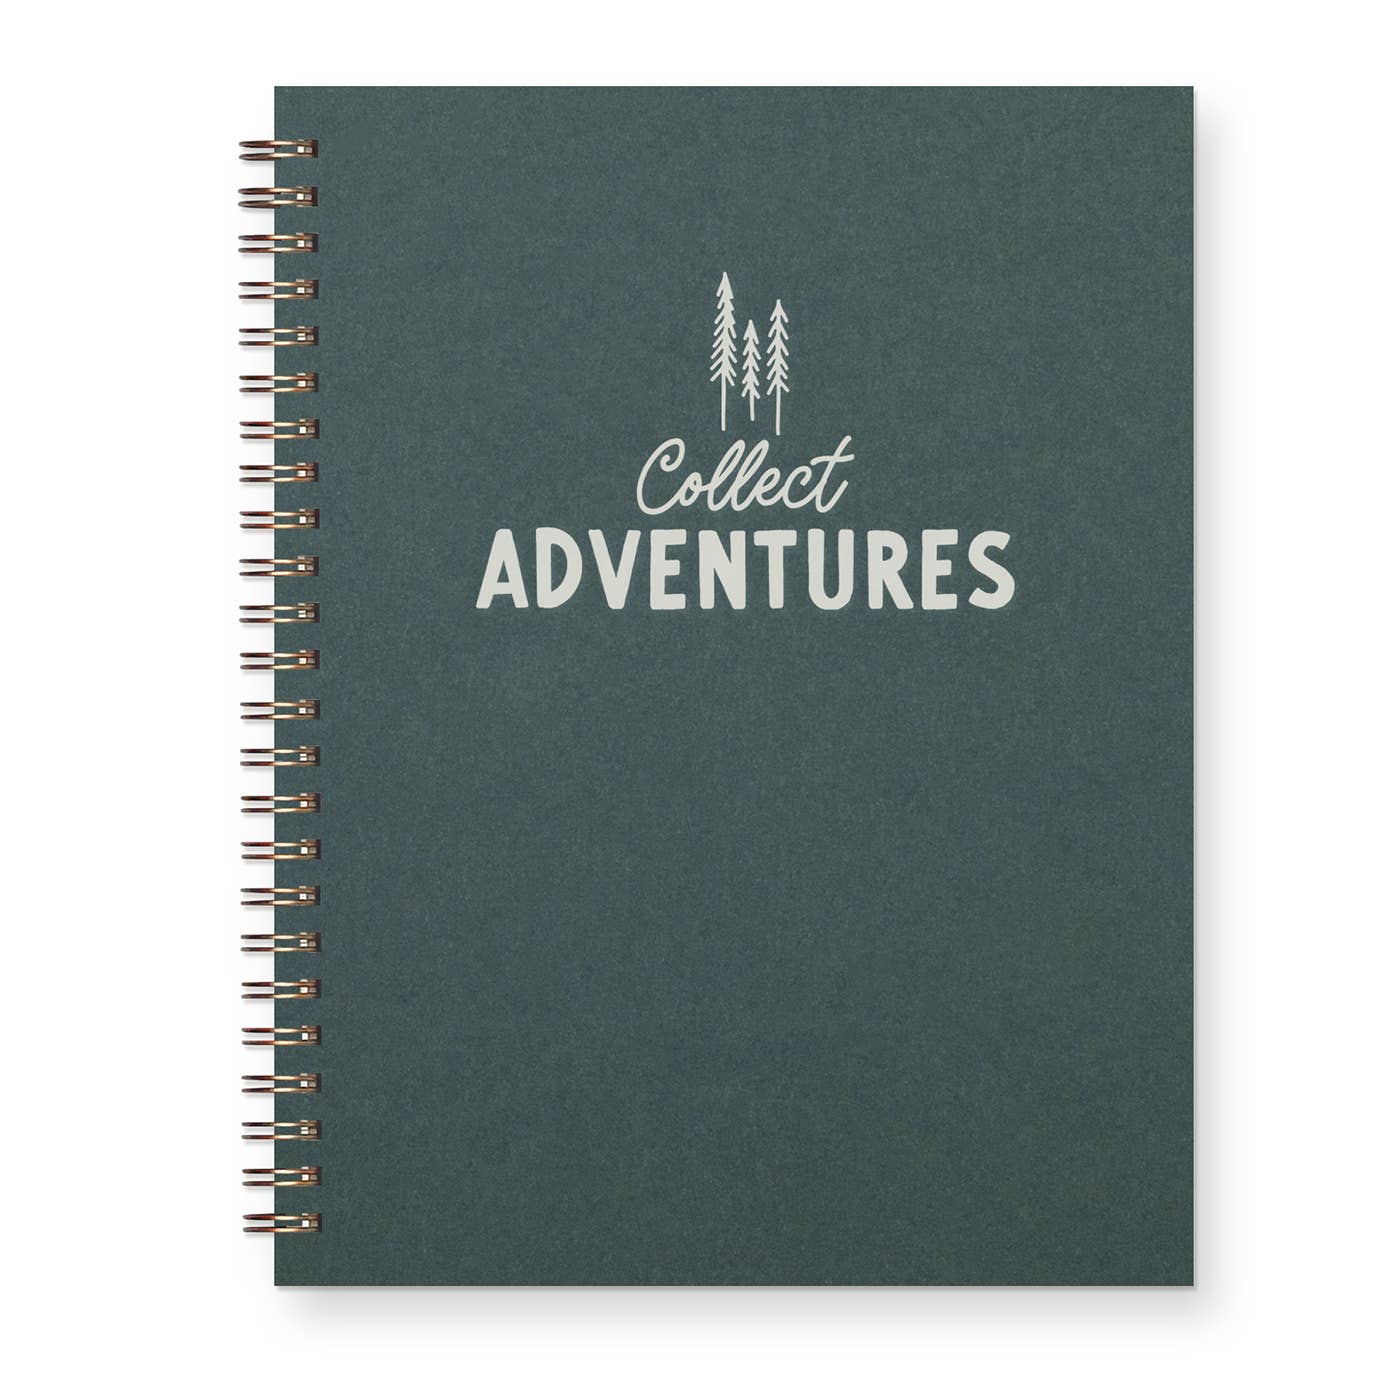 Collect Adventures Journal: Lined Notebook